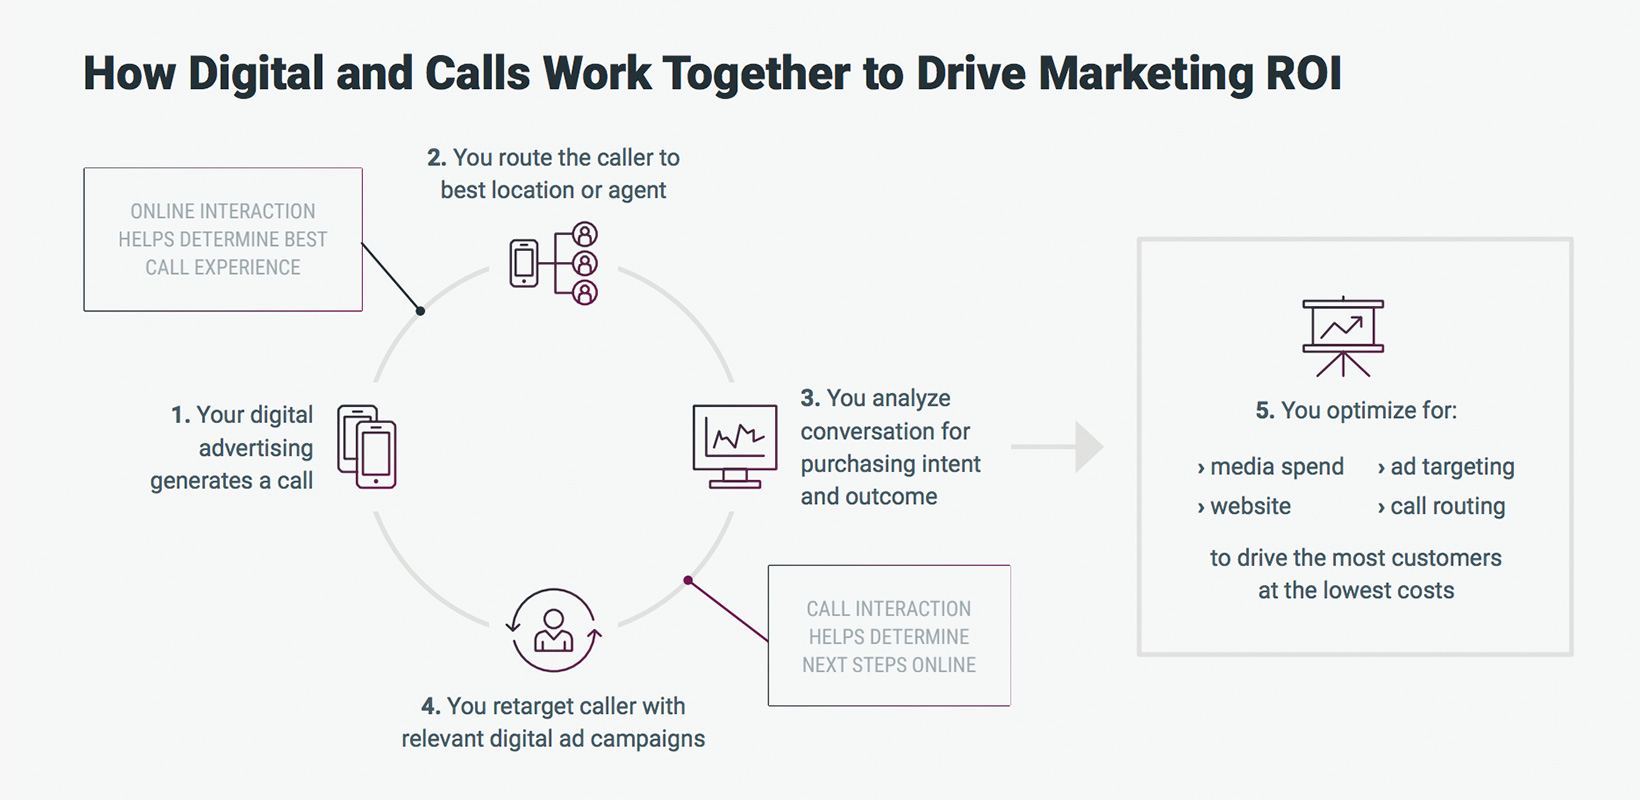 How digital and calls work together to drive marketing ROI